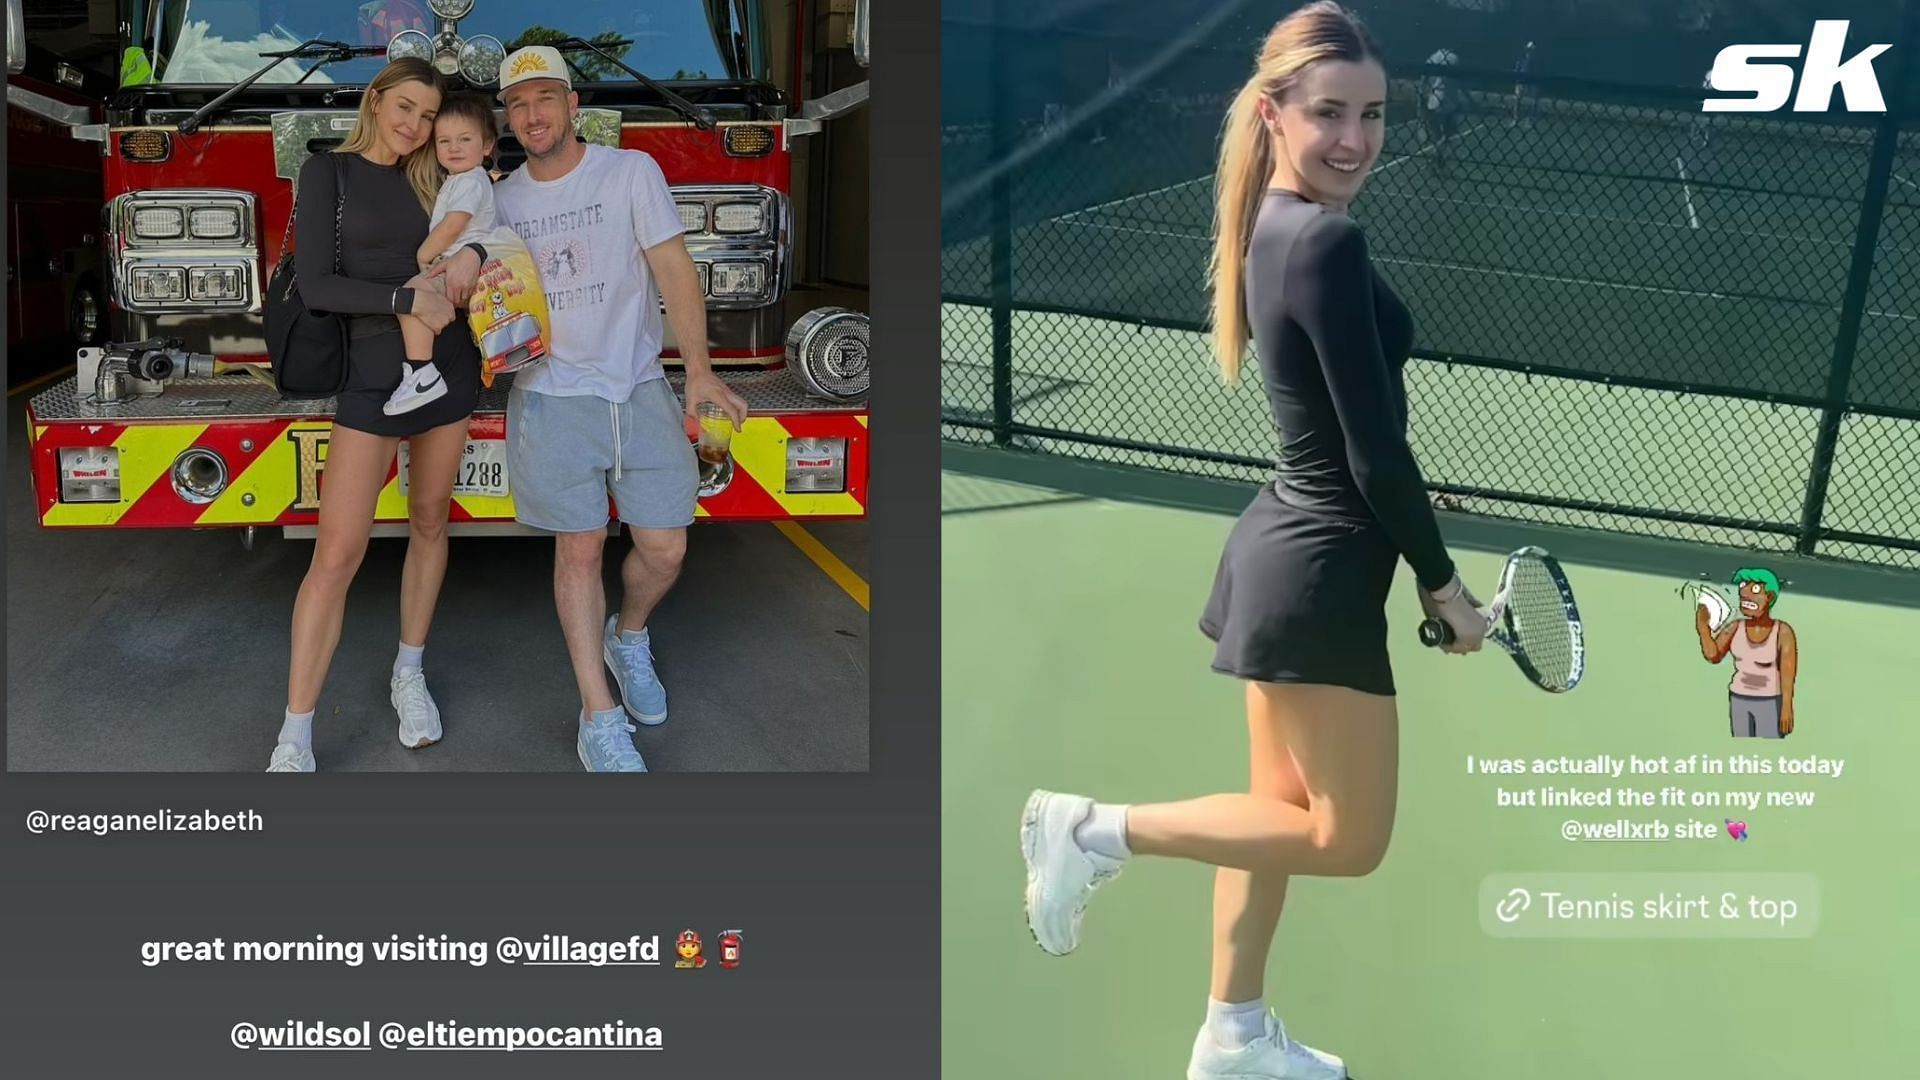 Reagan shows off her newest all-black tennis outfit on social media